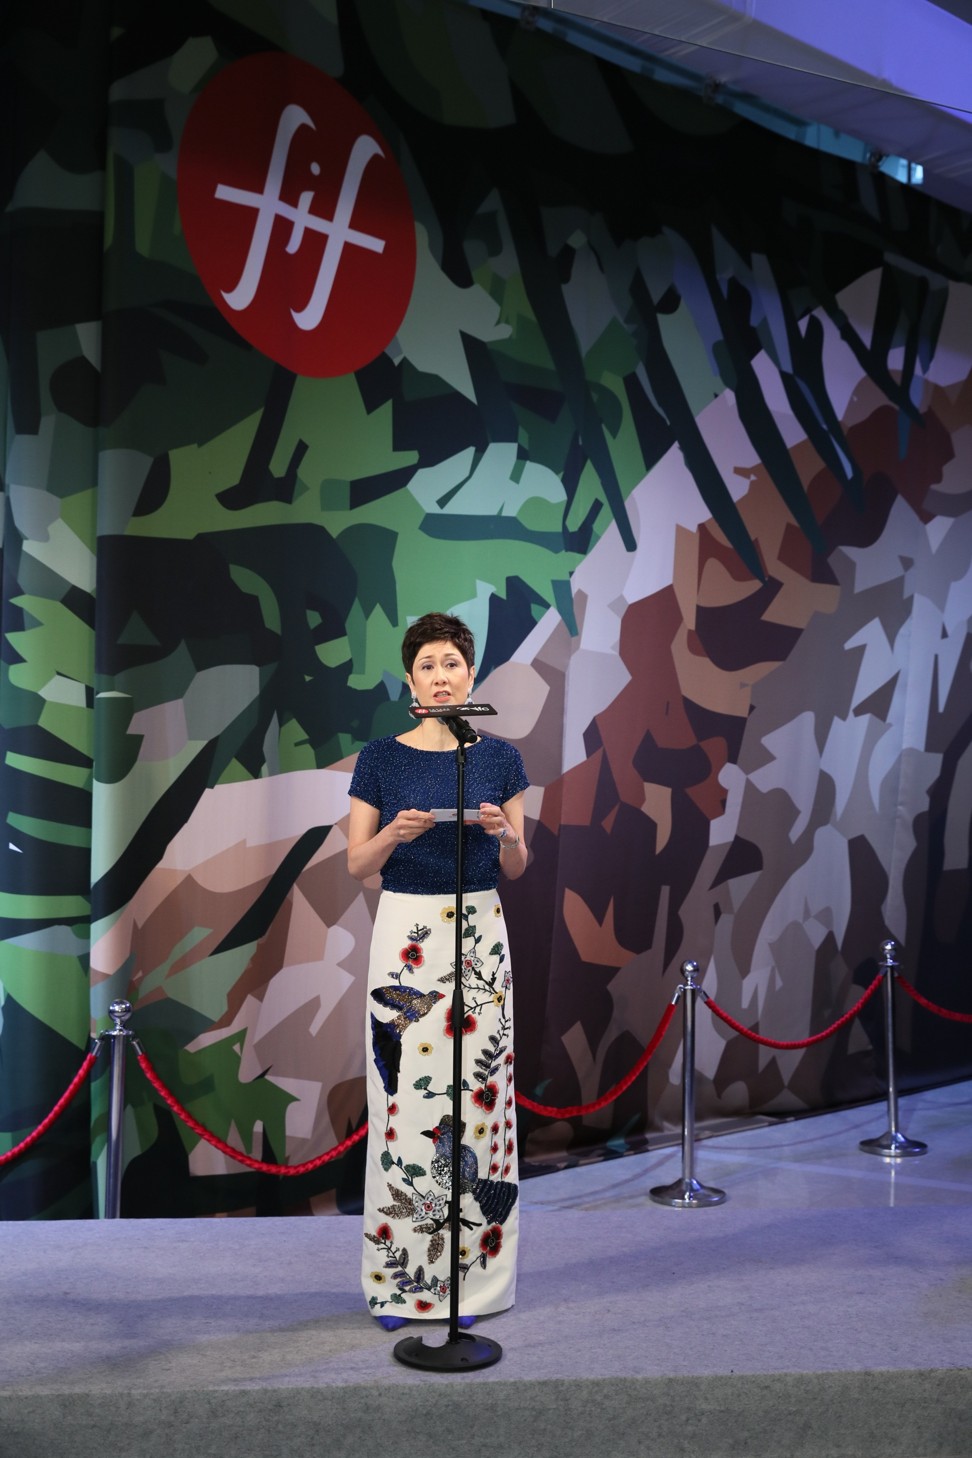 Michelle Ong, chairman of charity First Initiative Foundation, speaks at the unveiling of the ‘Meet the T.rex’ attraction at IFC Mall in Hong Kong